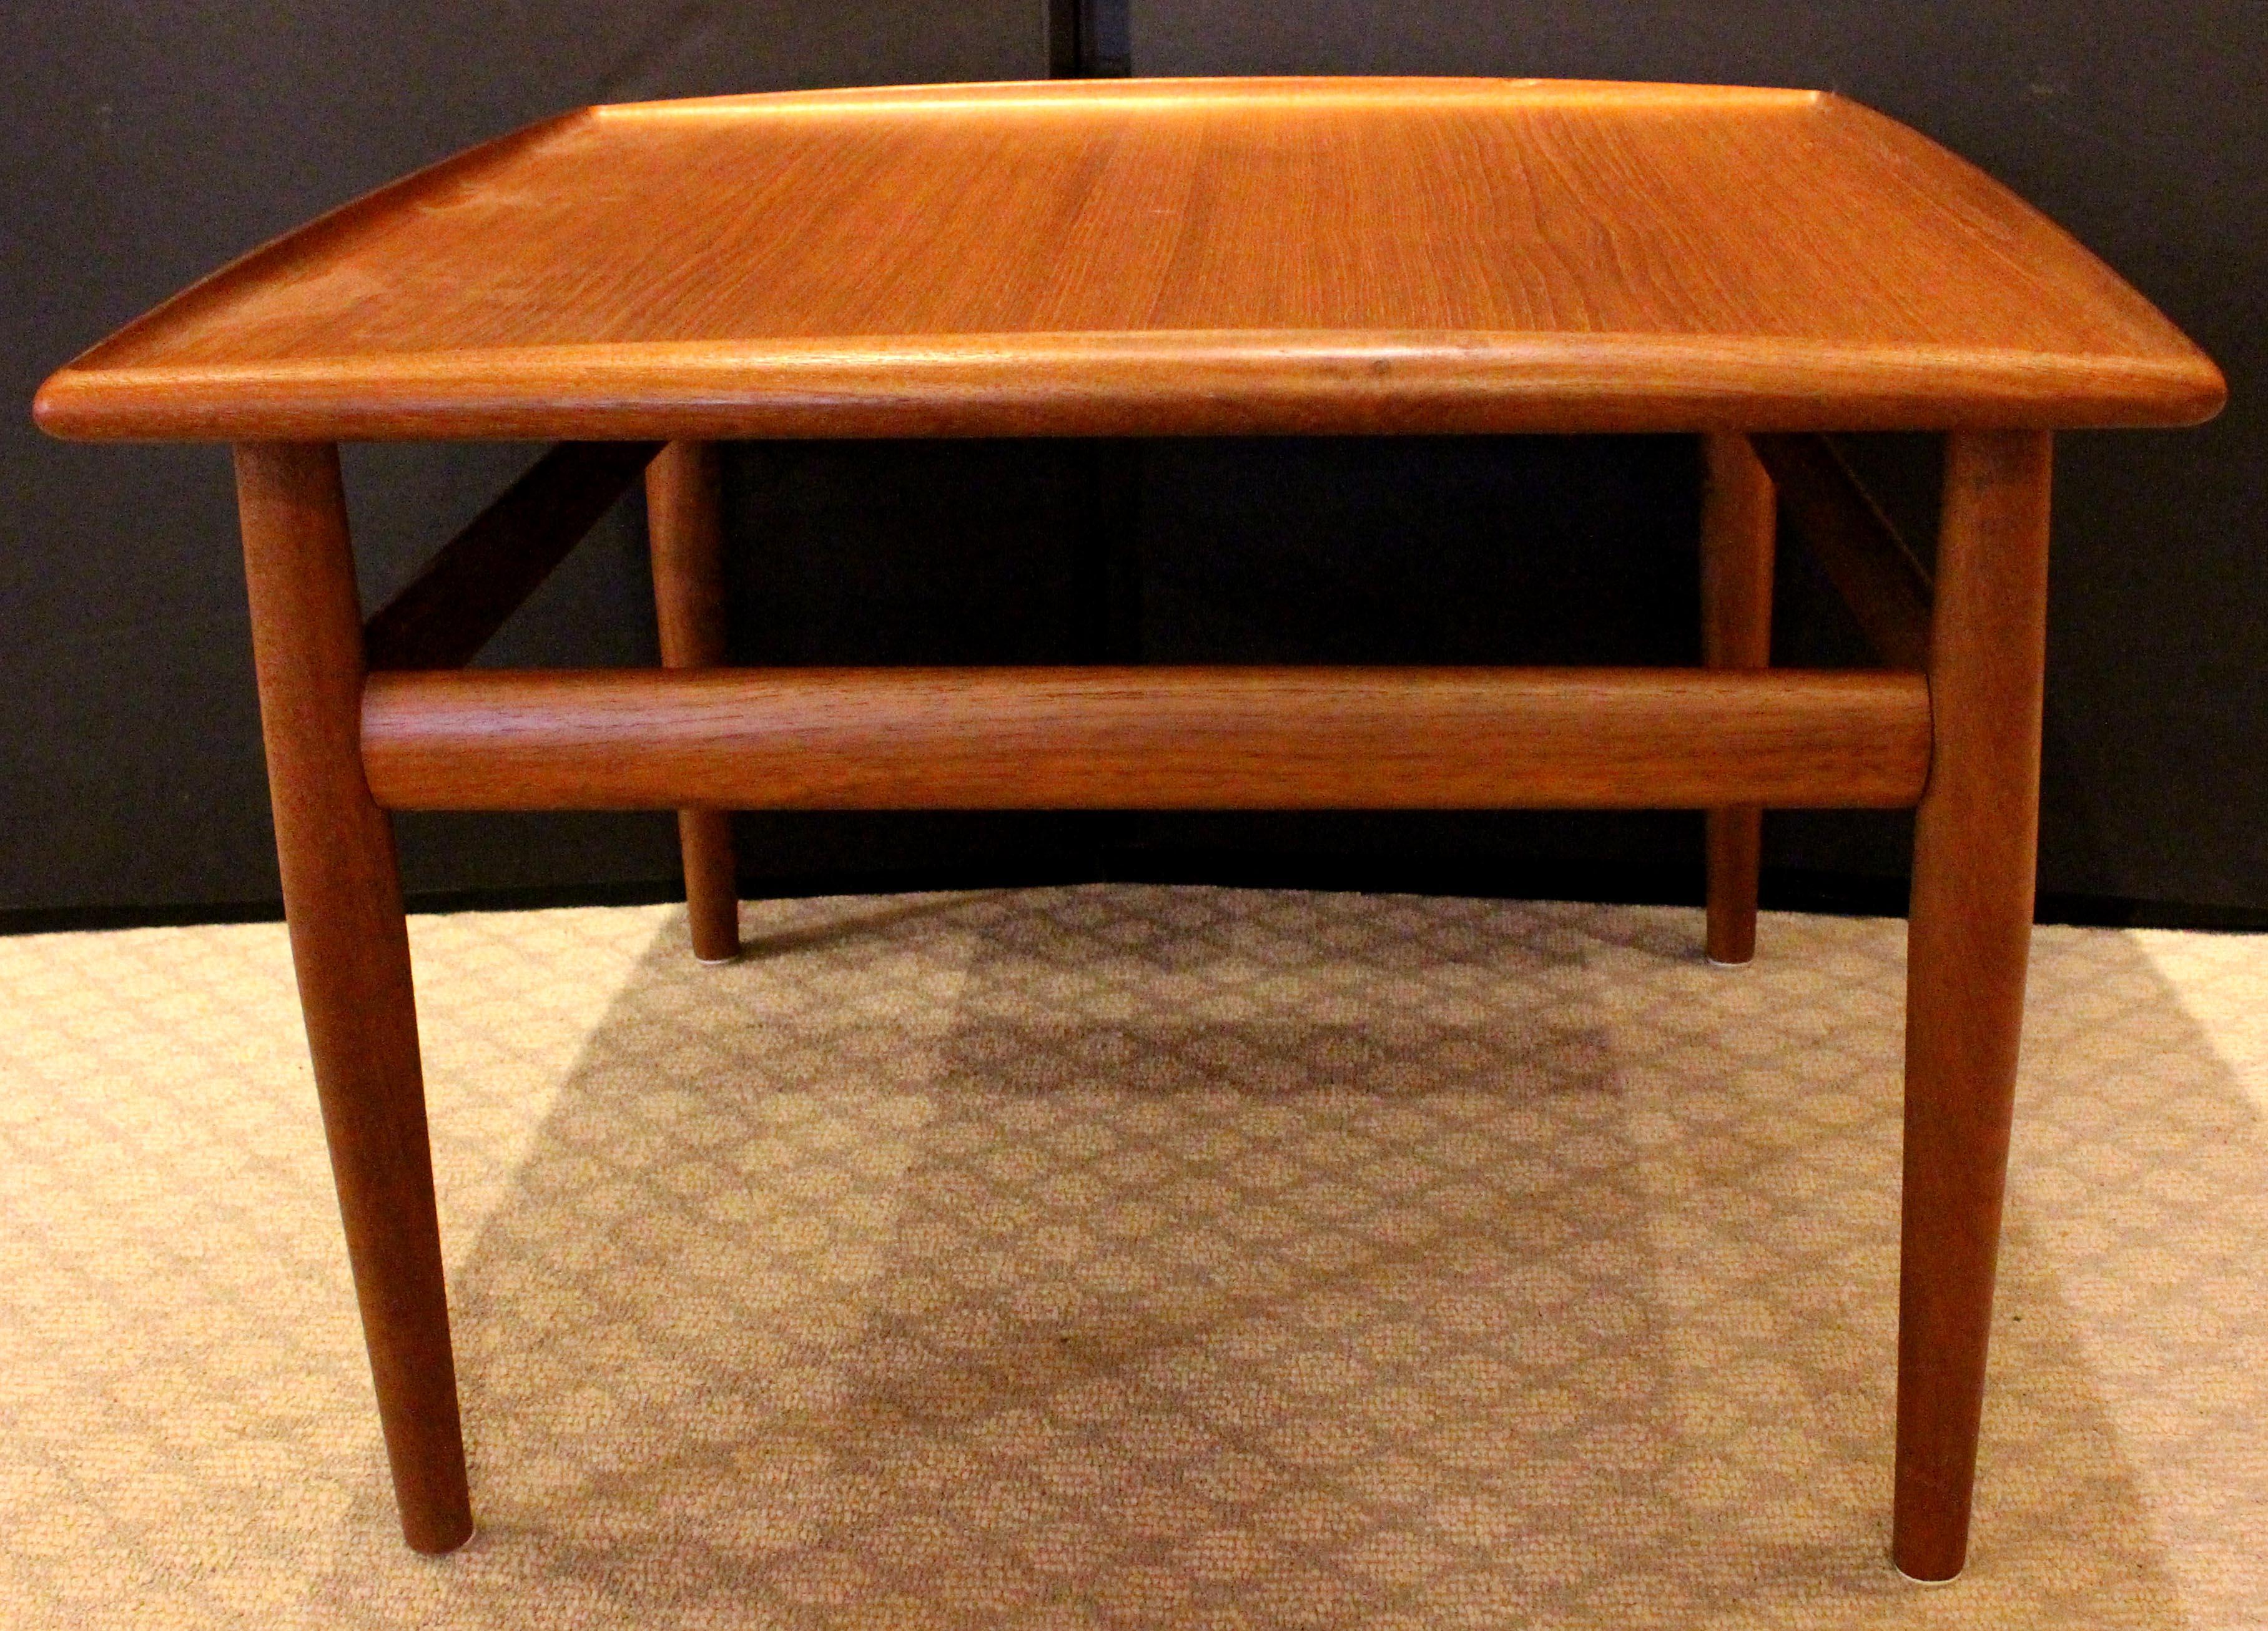 Mid Century Modern square side or coffee table, c.1960s. Designed by Greta Jalk for Glostrup of Denmark. Solid teak with teak veneered surface. Upswept edges. One minor 3/4